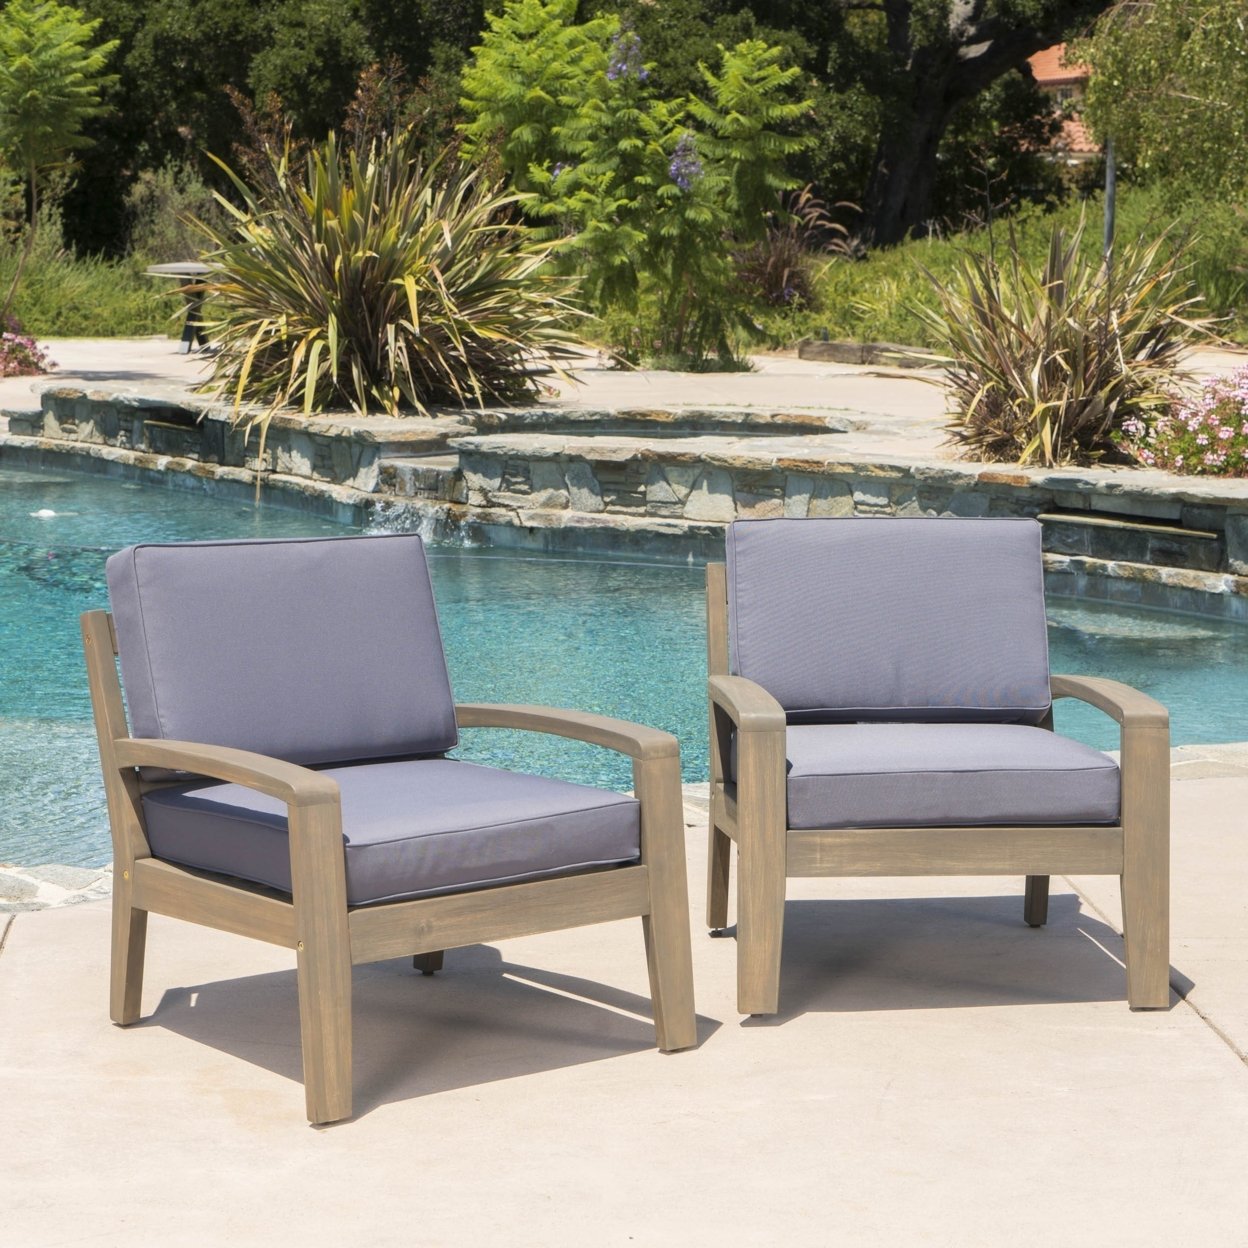 Giselle Outdoor Acacia Wood Club Chairs With Sunbrella Cushions - Gray, Set Of 2